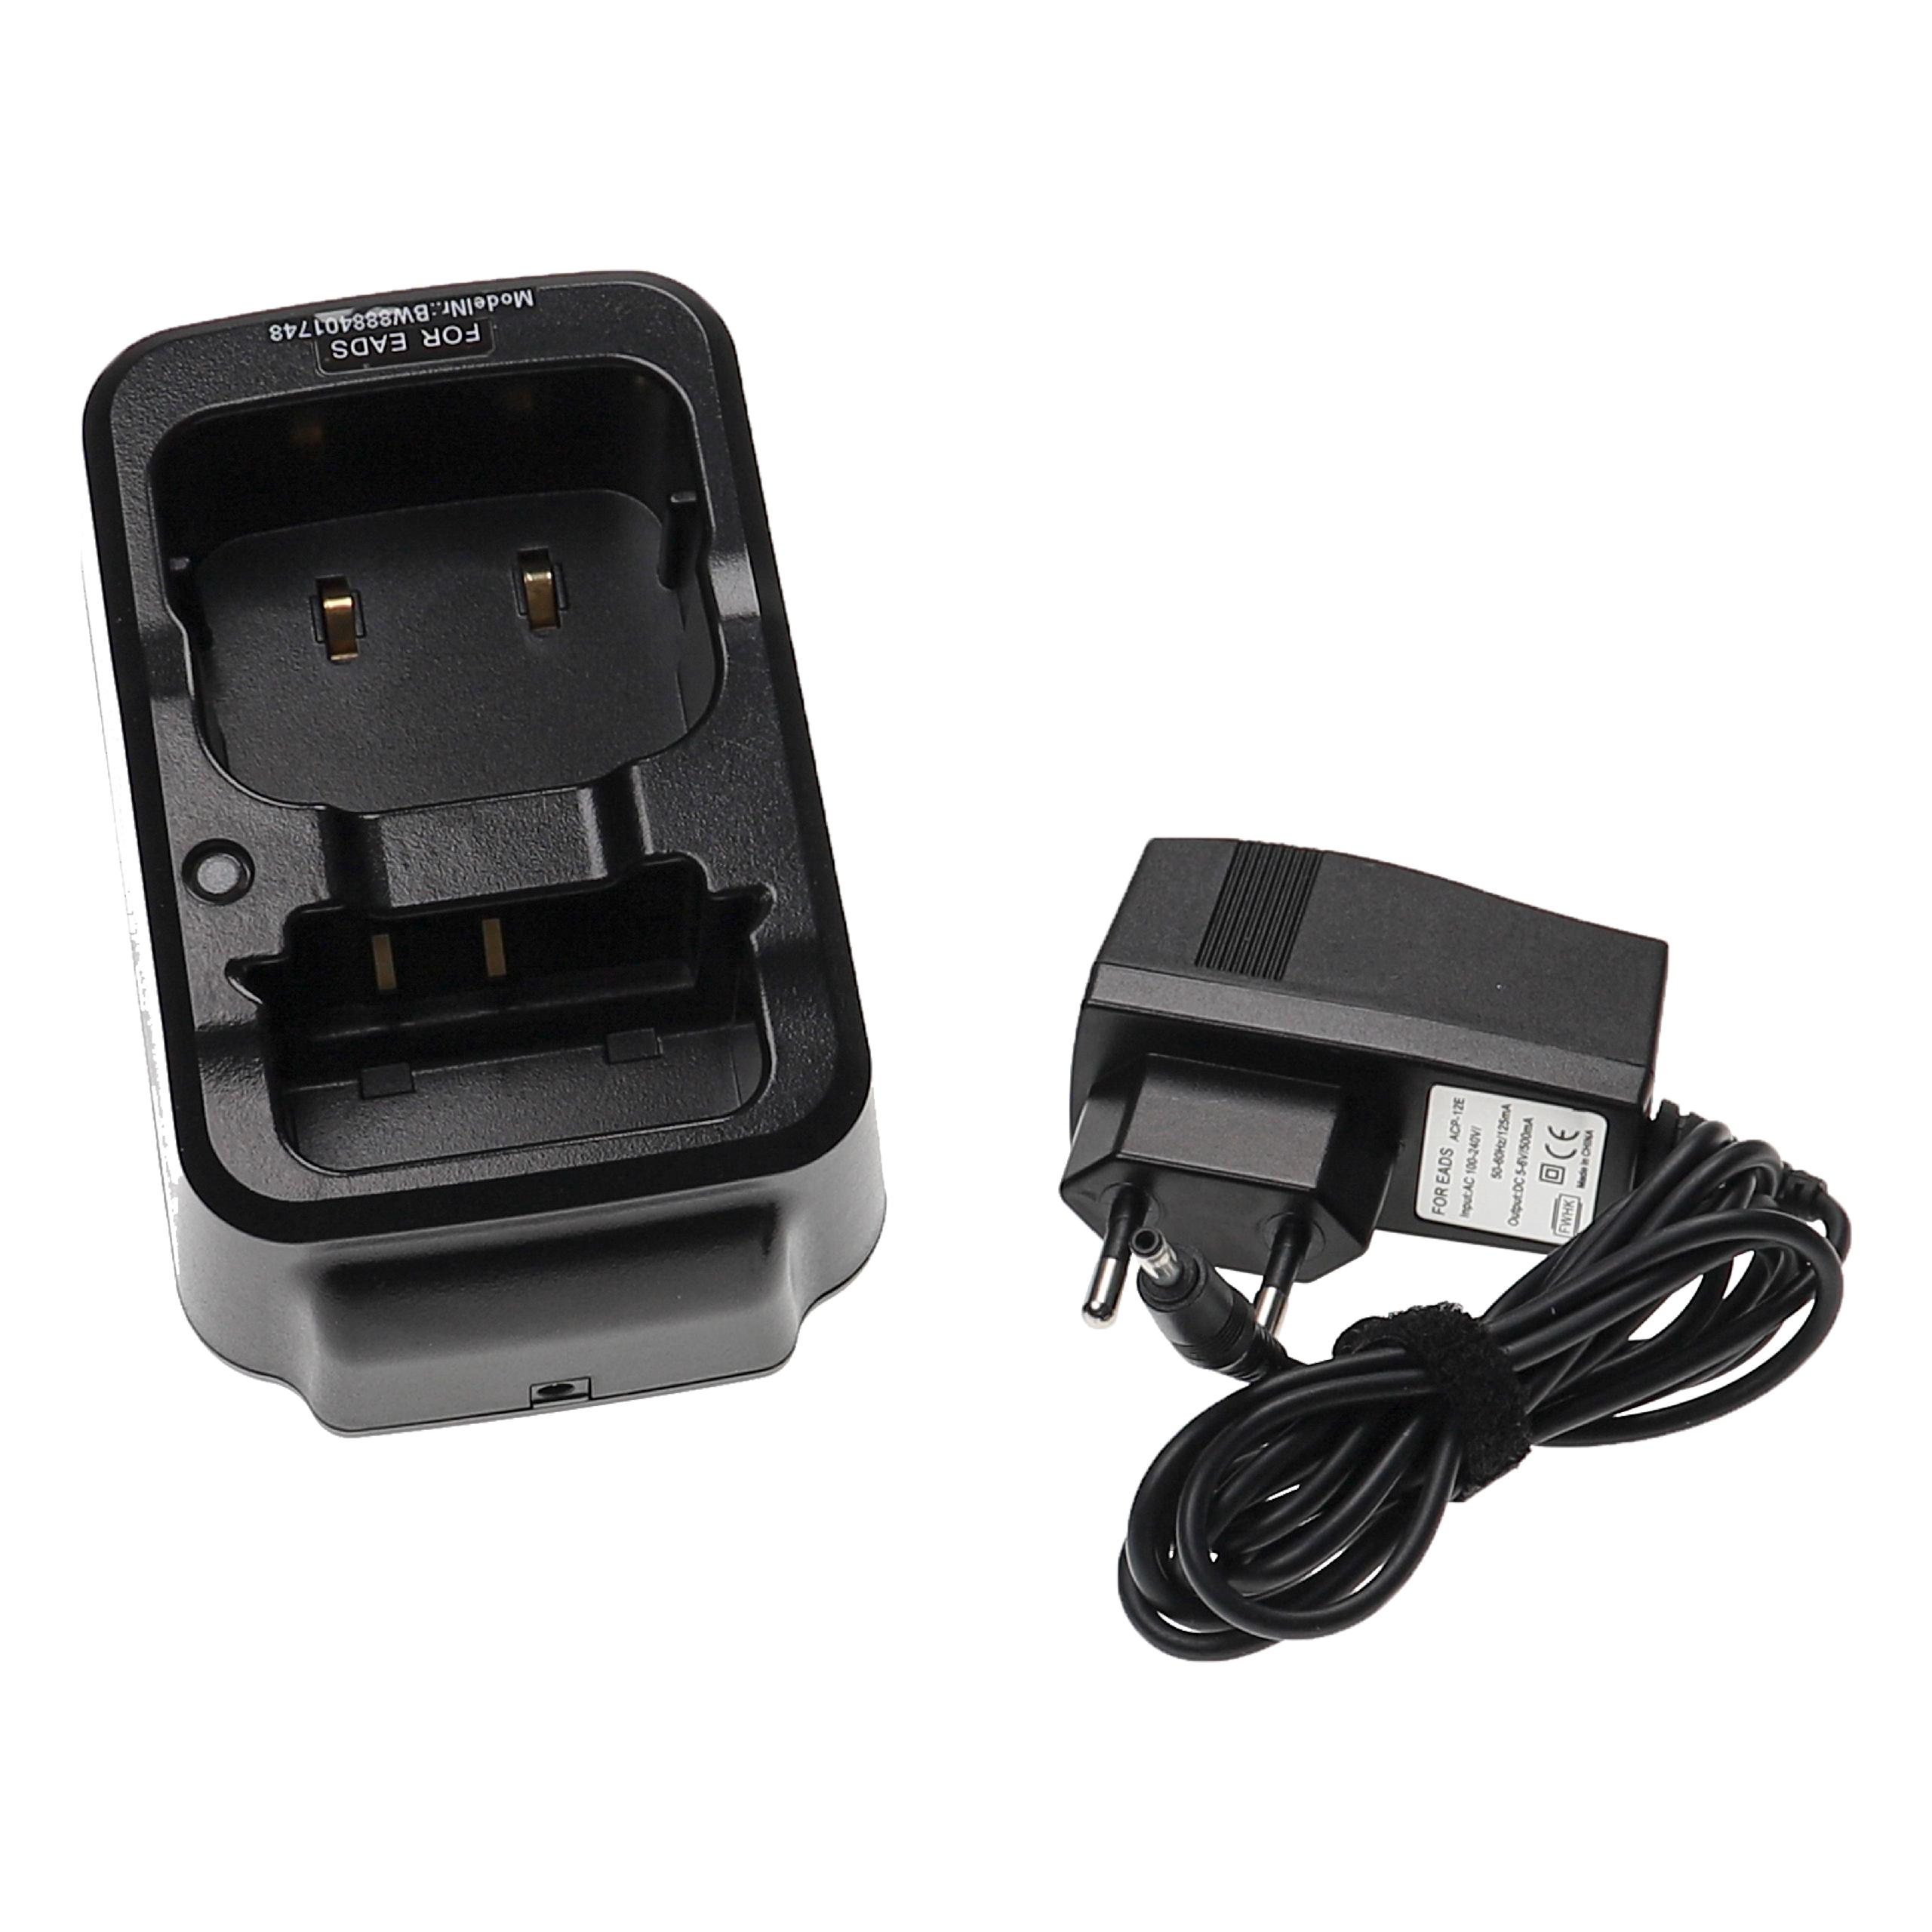 Charger + Mains Adapter Suitable for Airbus Radio Batteries - 4.8 V, 0.5 A